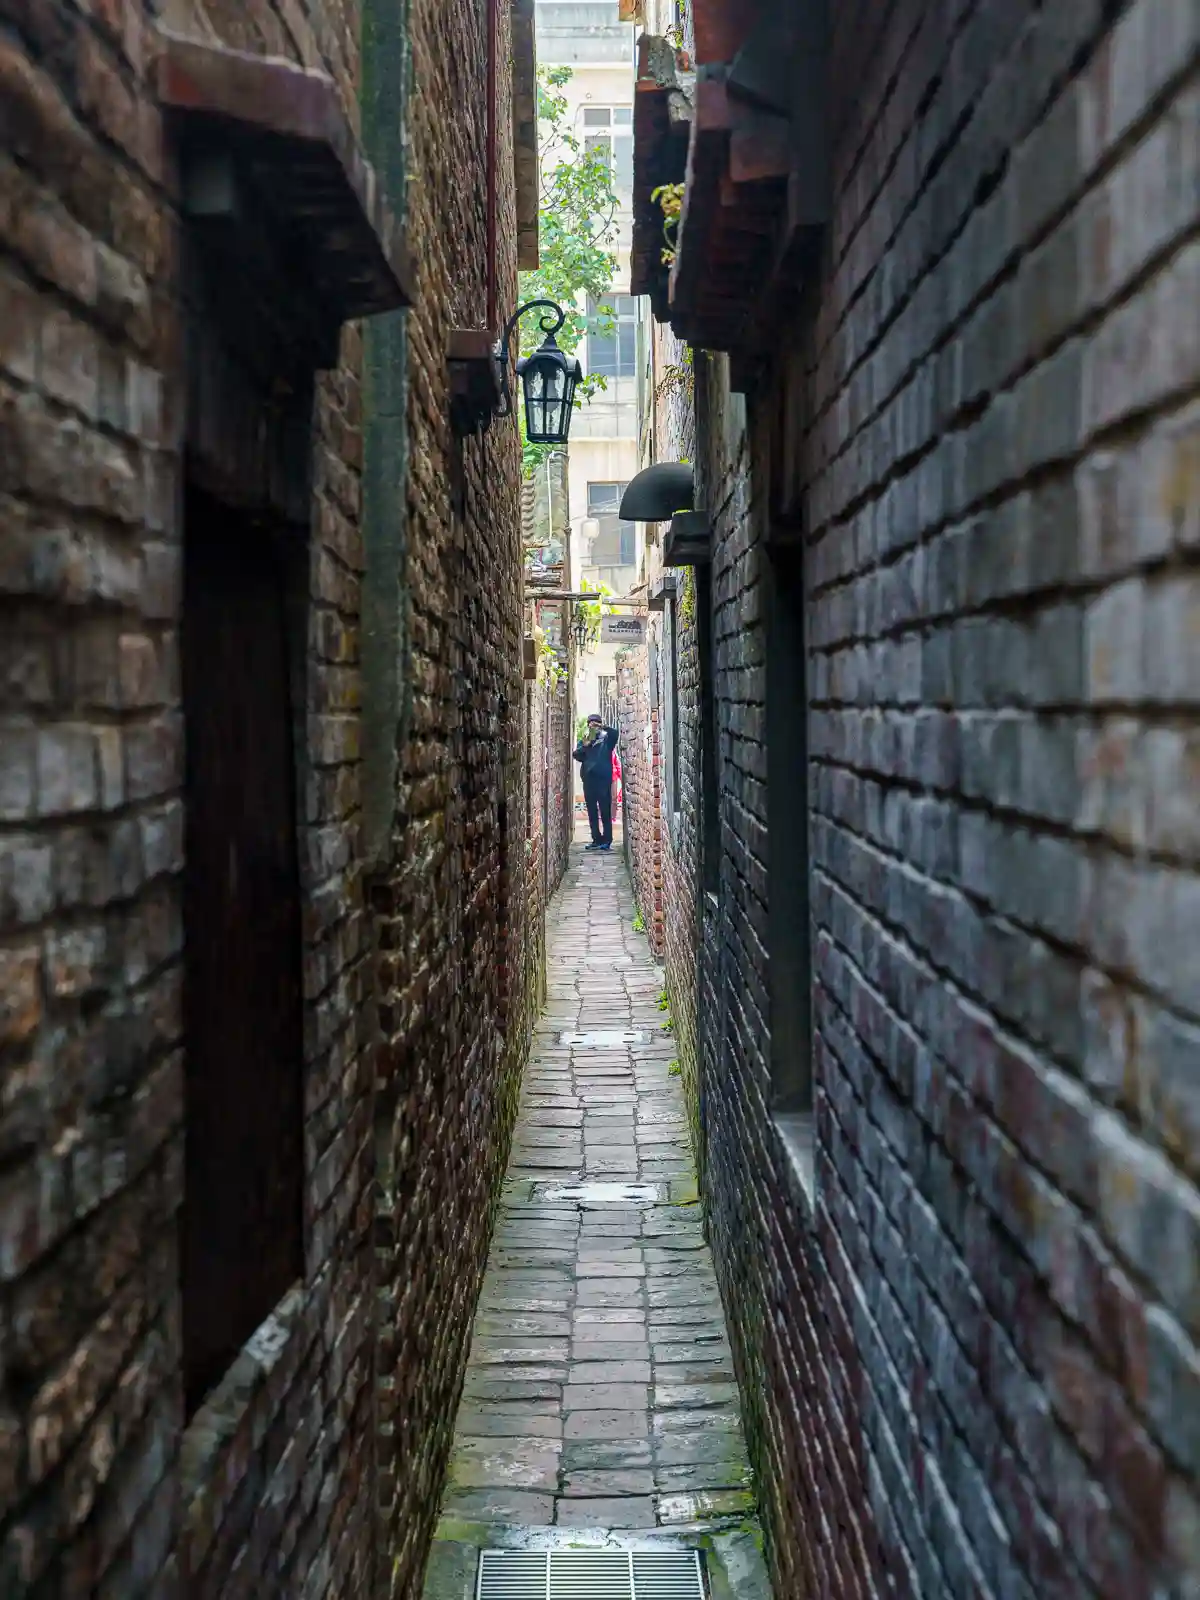 Looking down the narrow corridor of Gentlemen Lane we see a man taking a photo on the far side.